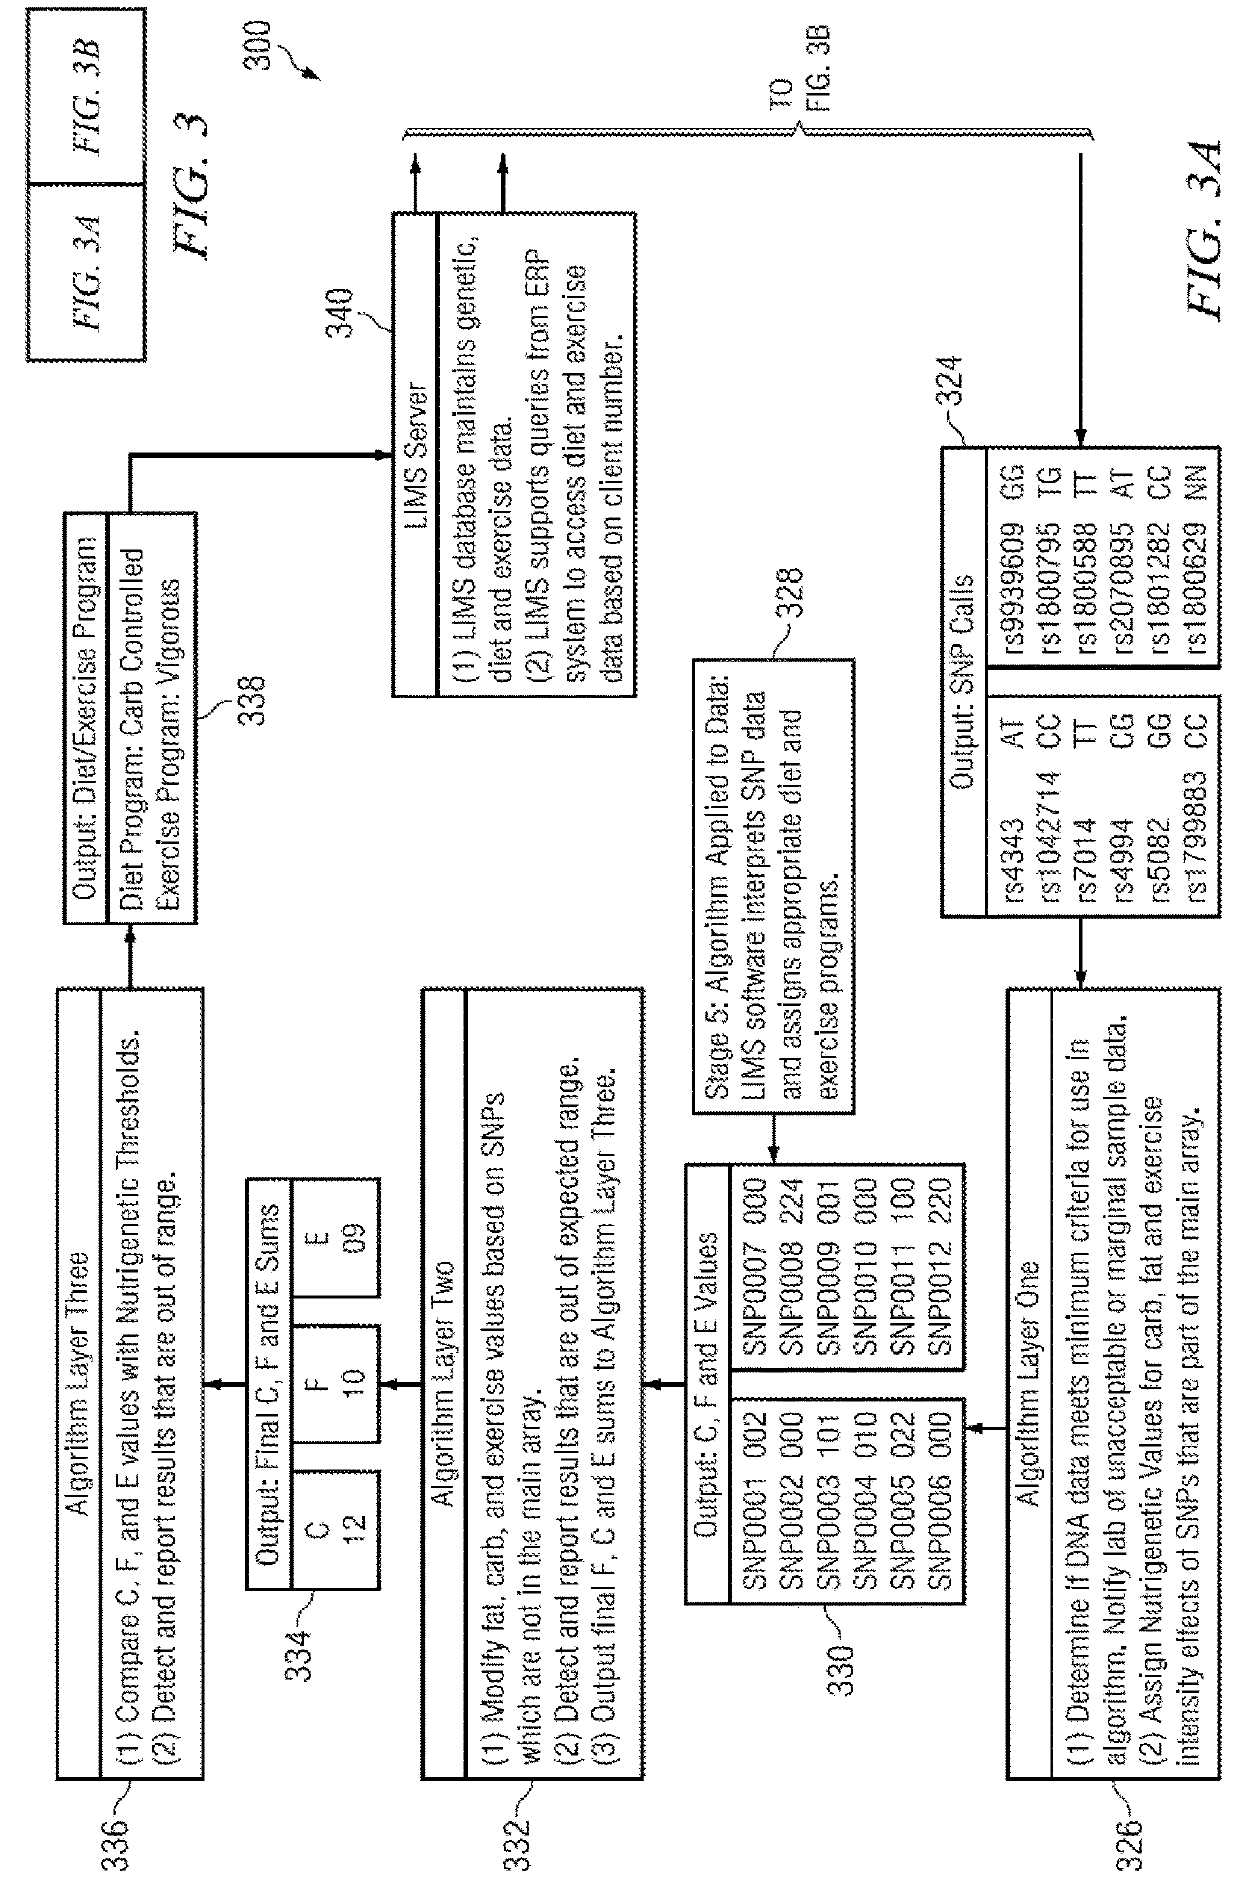 Weight management genetic test systems and methods